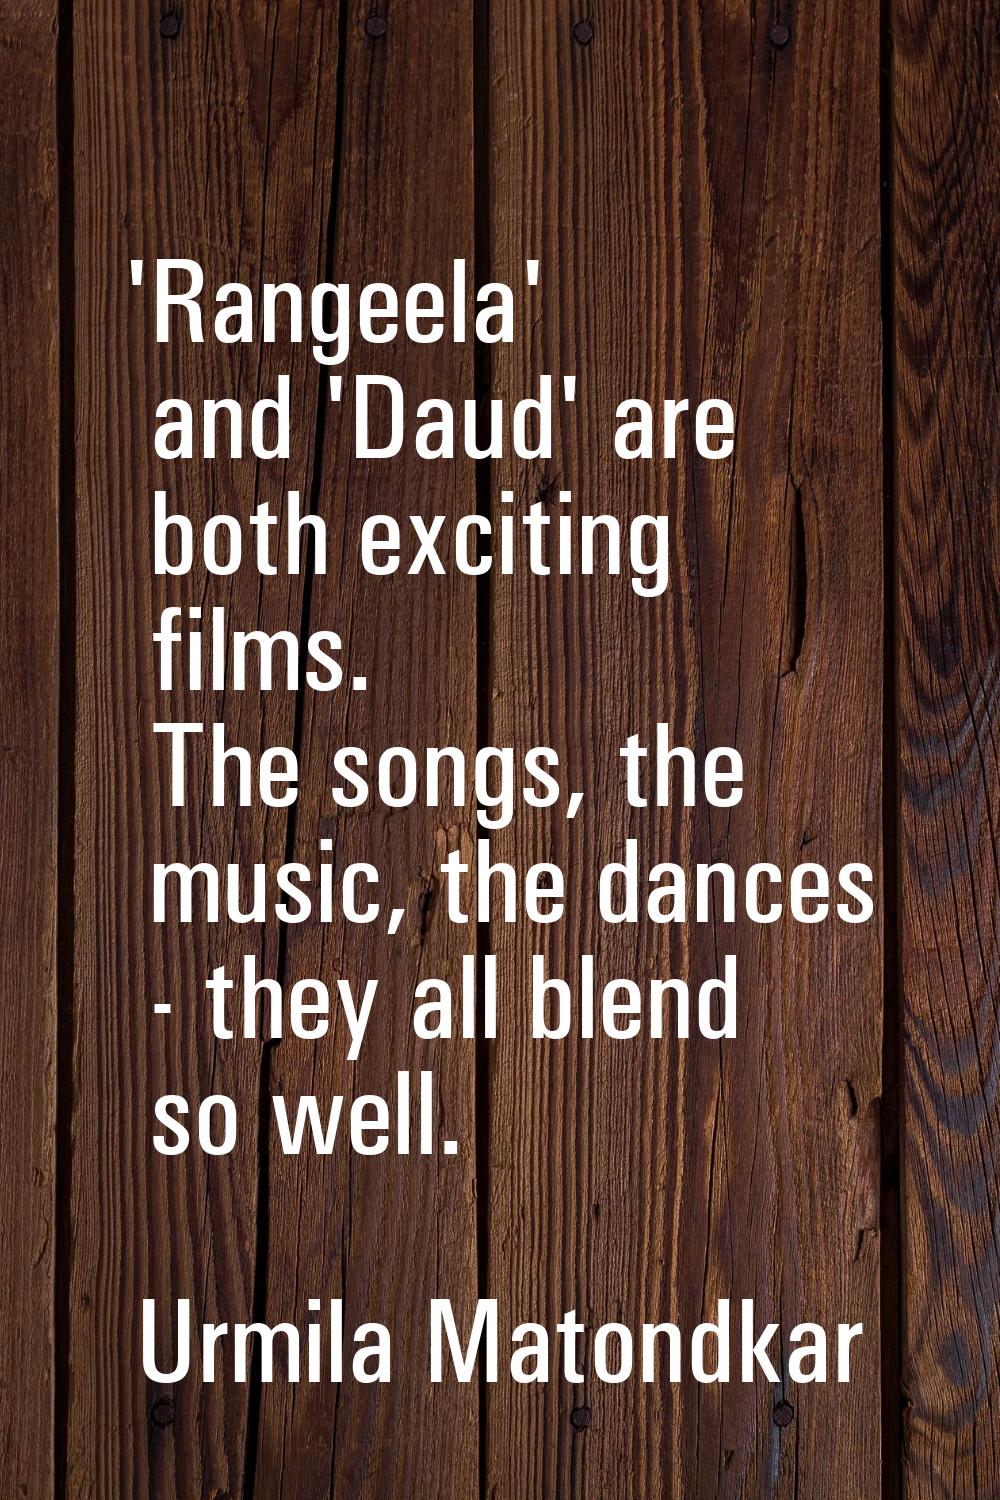 'Rangeela' and 'Daud' are both exciting films. The songs, the music, the dances - they all blend so